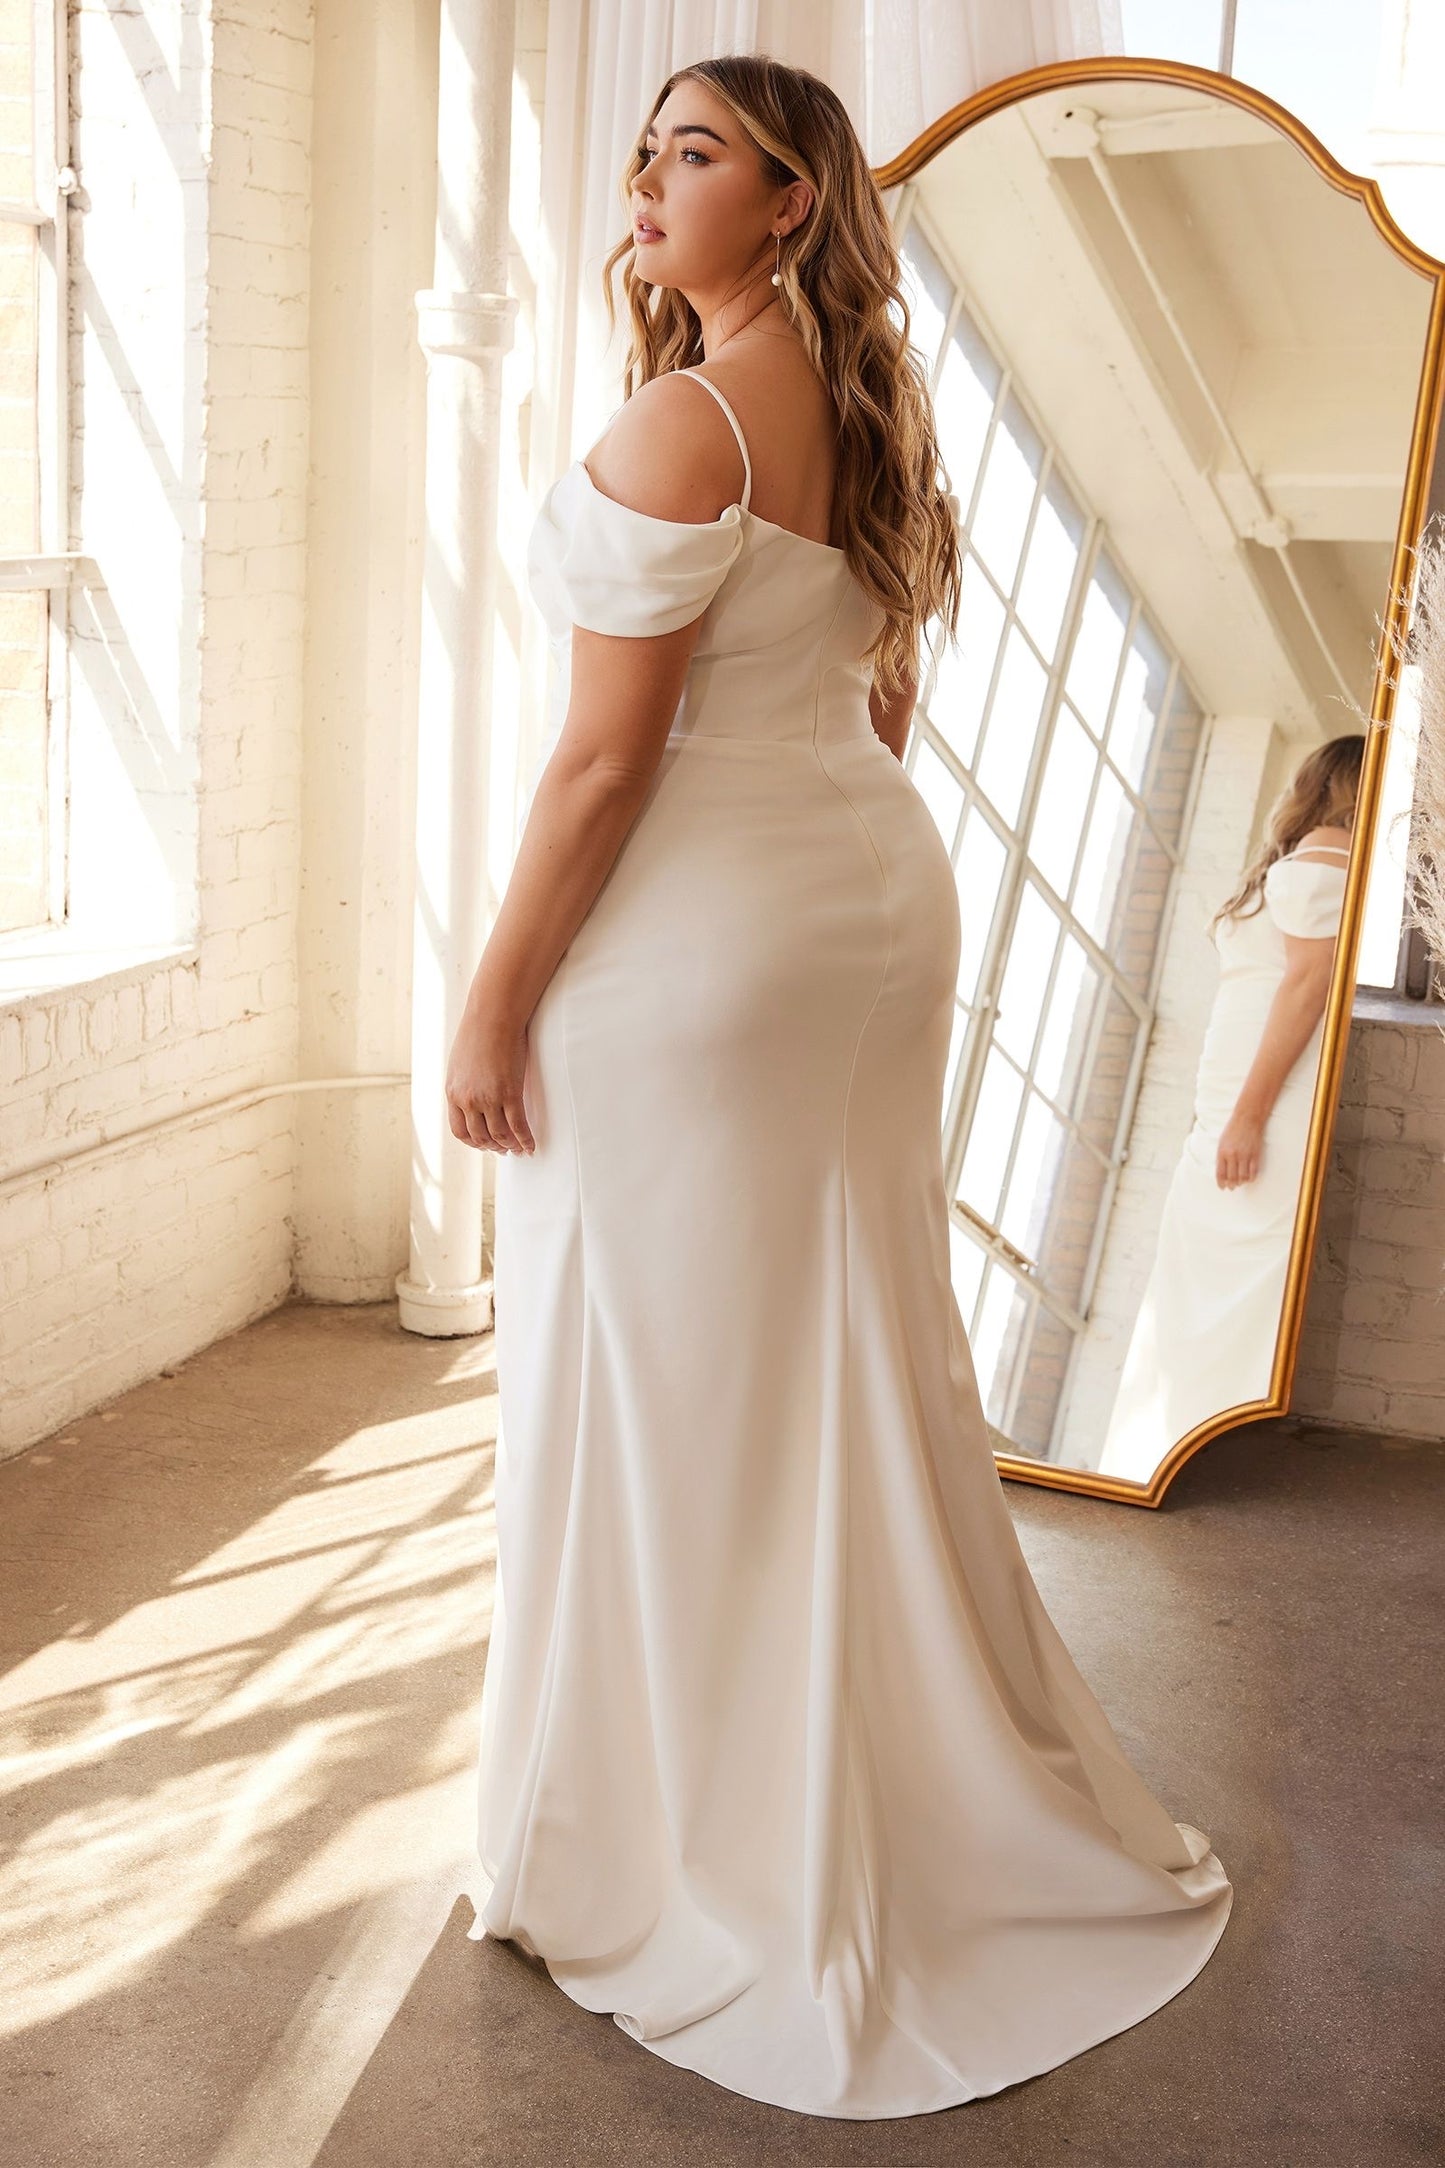 Chic and feminine wedding dress with off-the-shoulder pleated sleeve and subtle leg slit